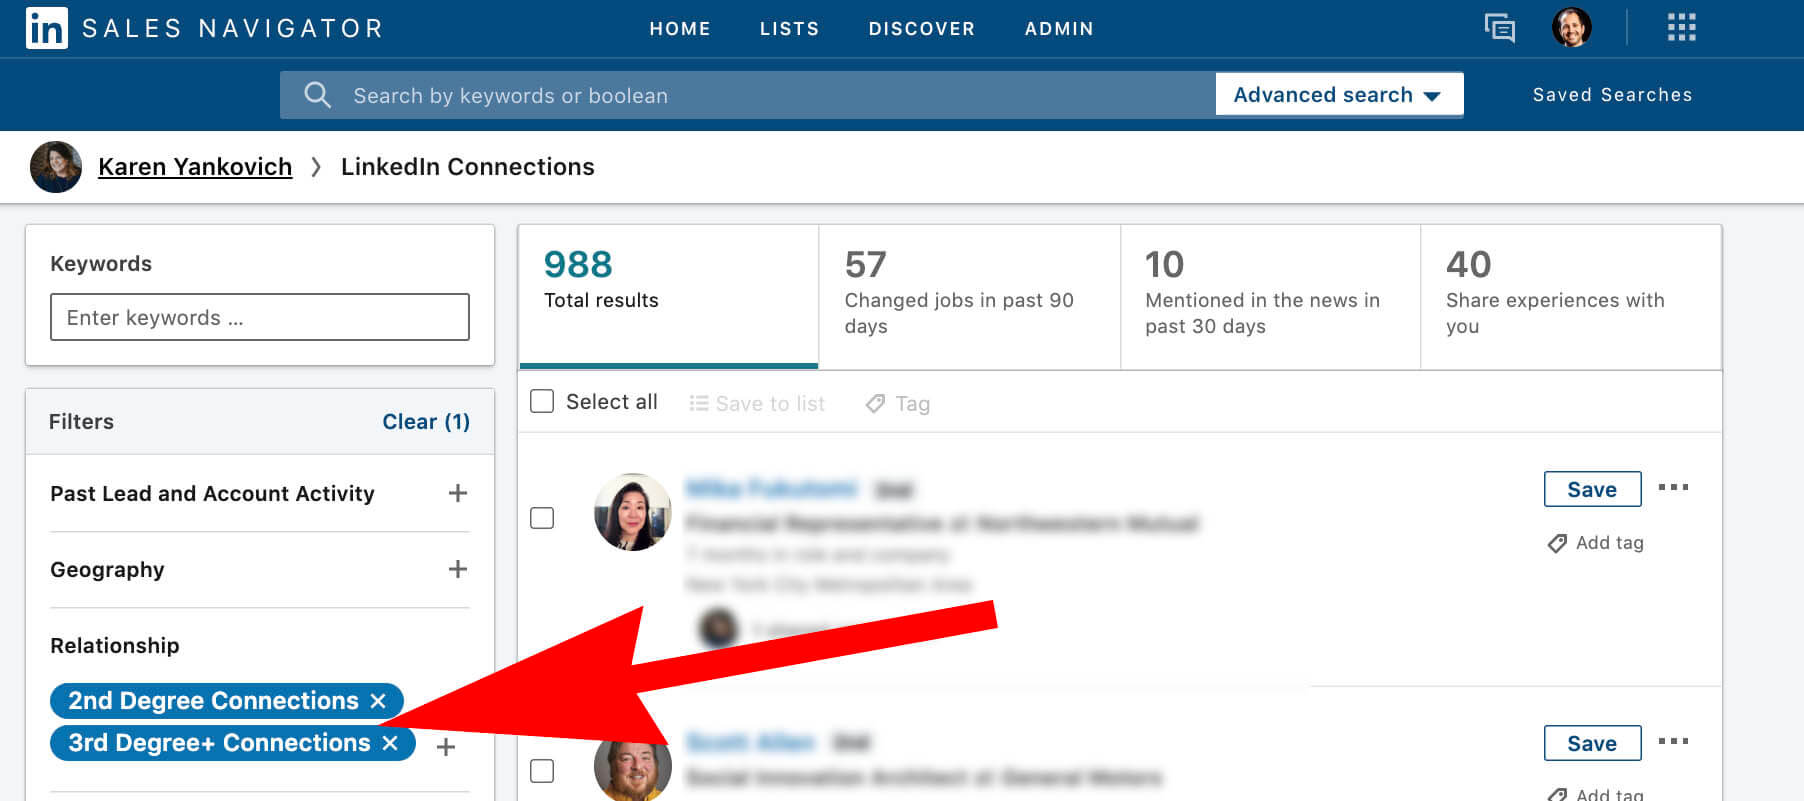 On Linkedin Sales Navigator view 2nd and 3rd degree connections 